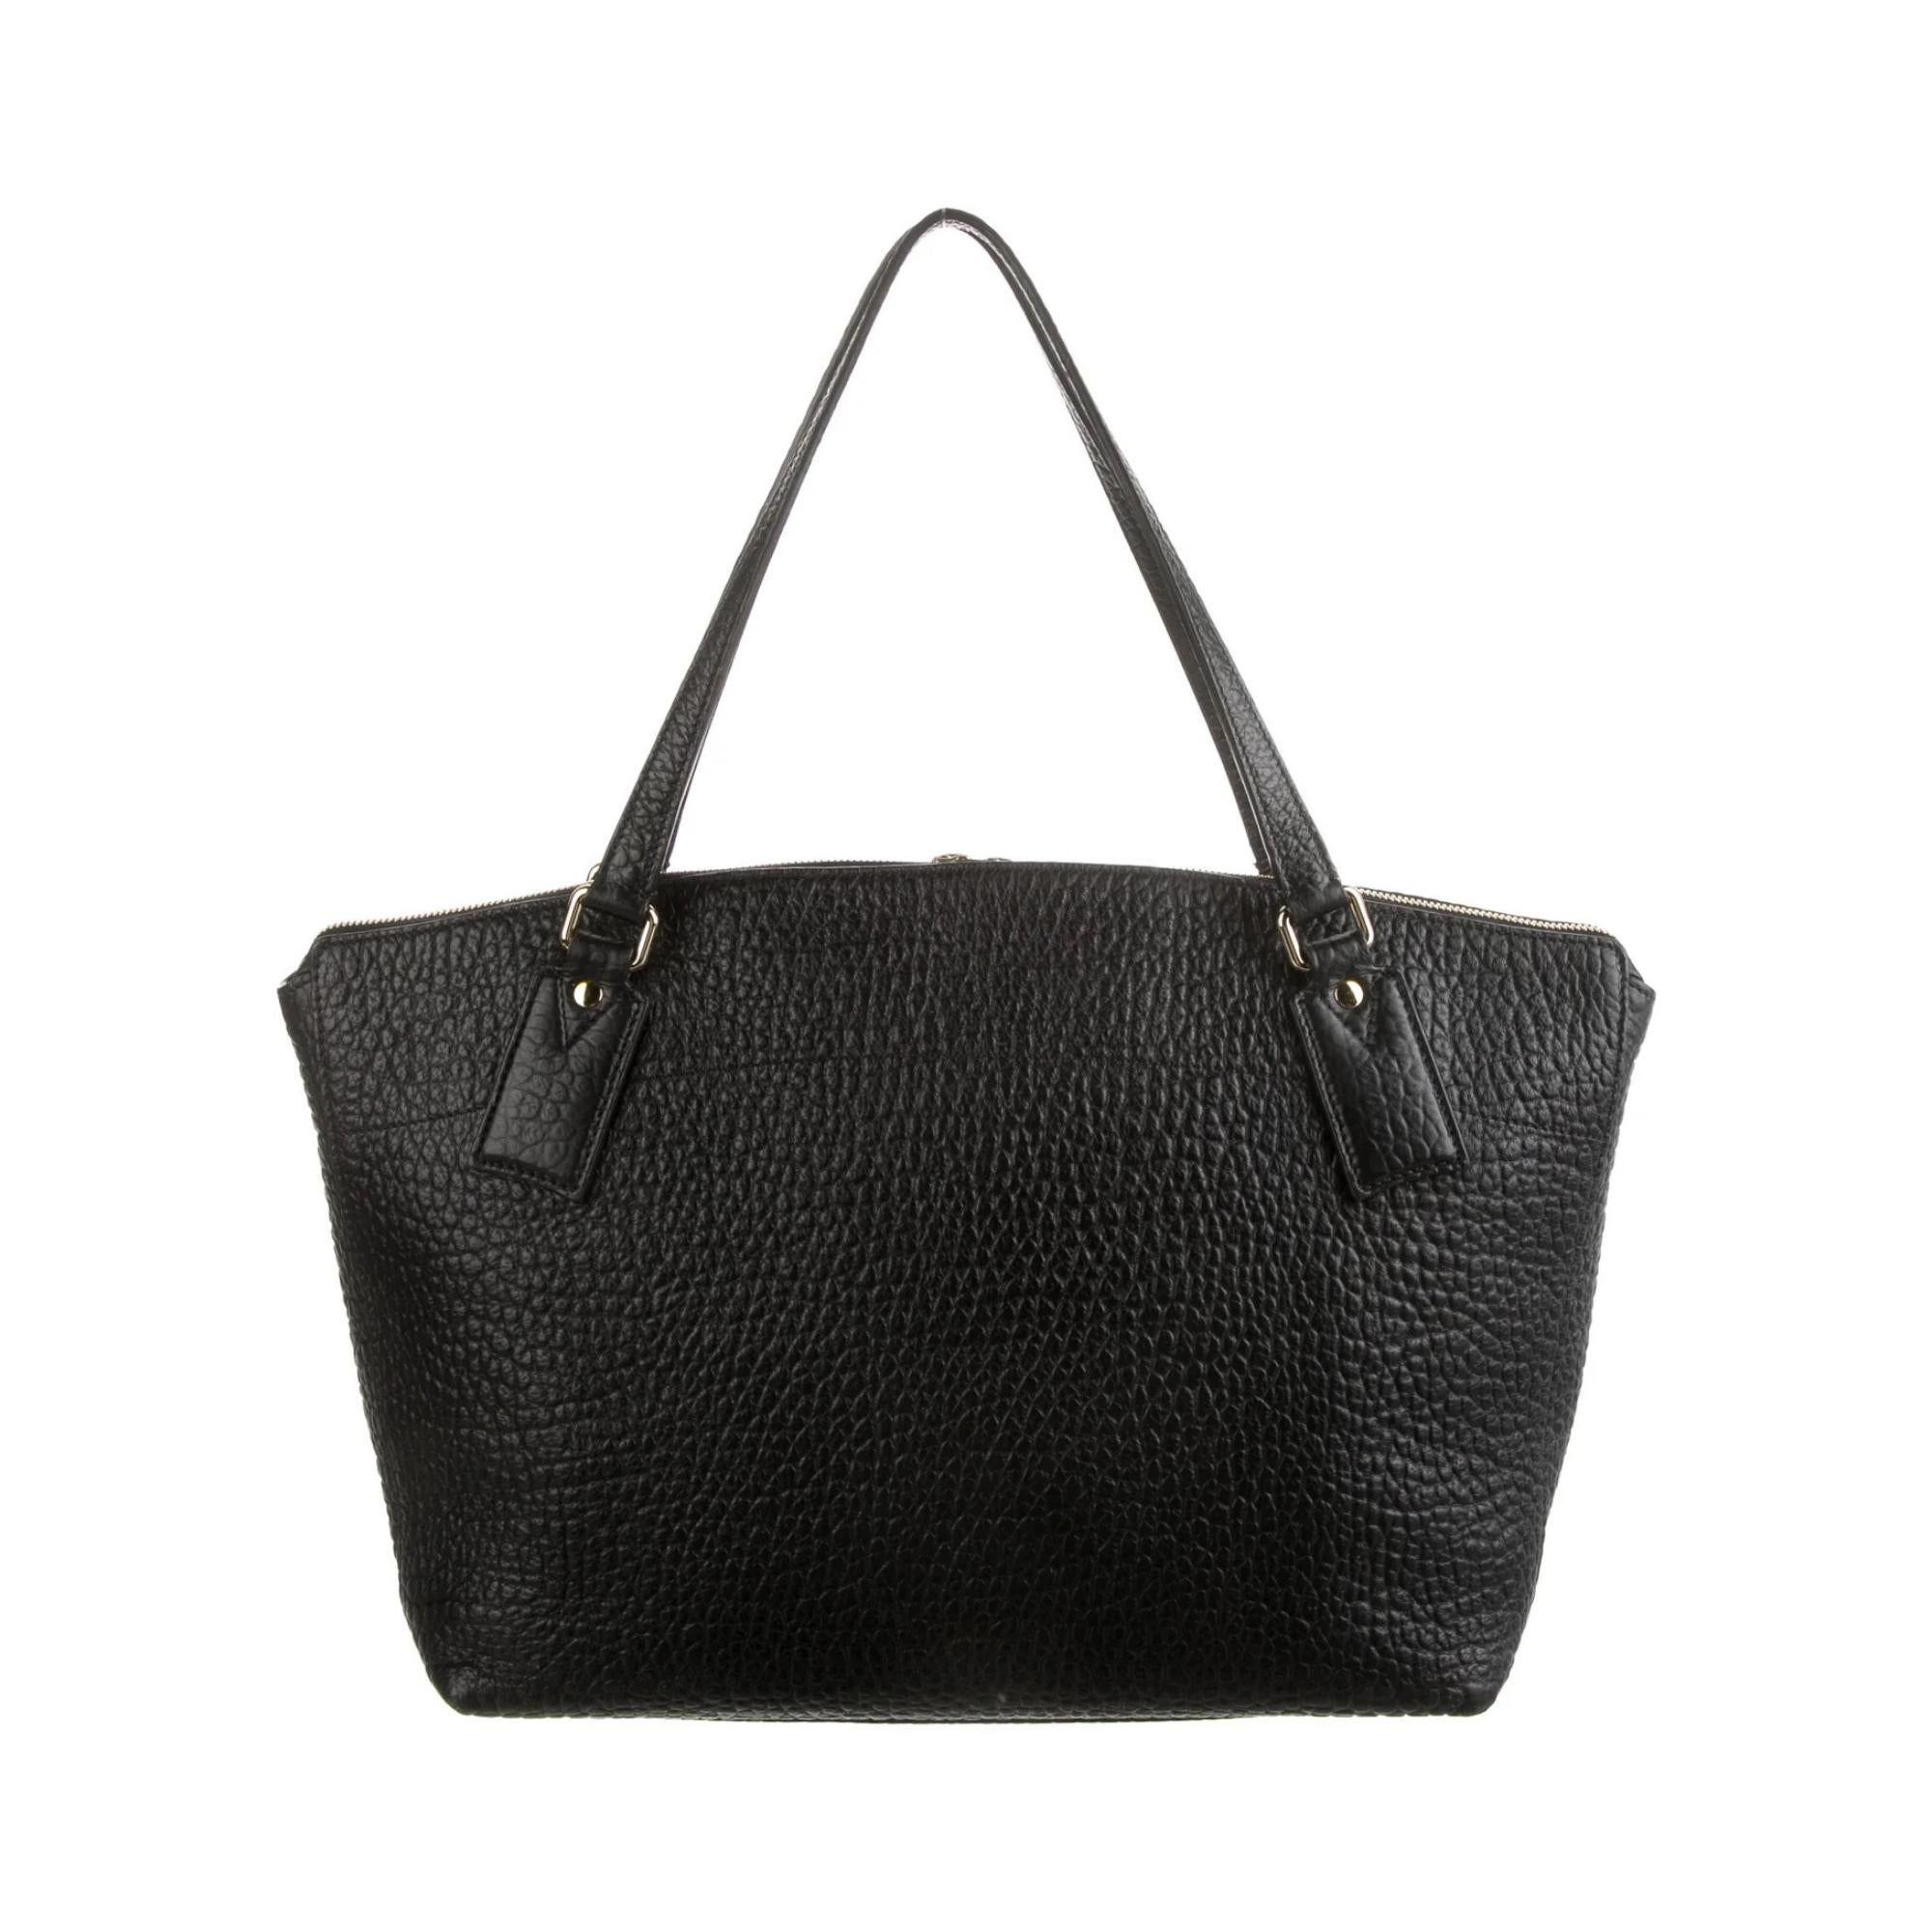 Burberry Grained Leather Black Tote Bag Bag Black In Excellent Condition For Sale In Montreal, Quebec